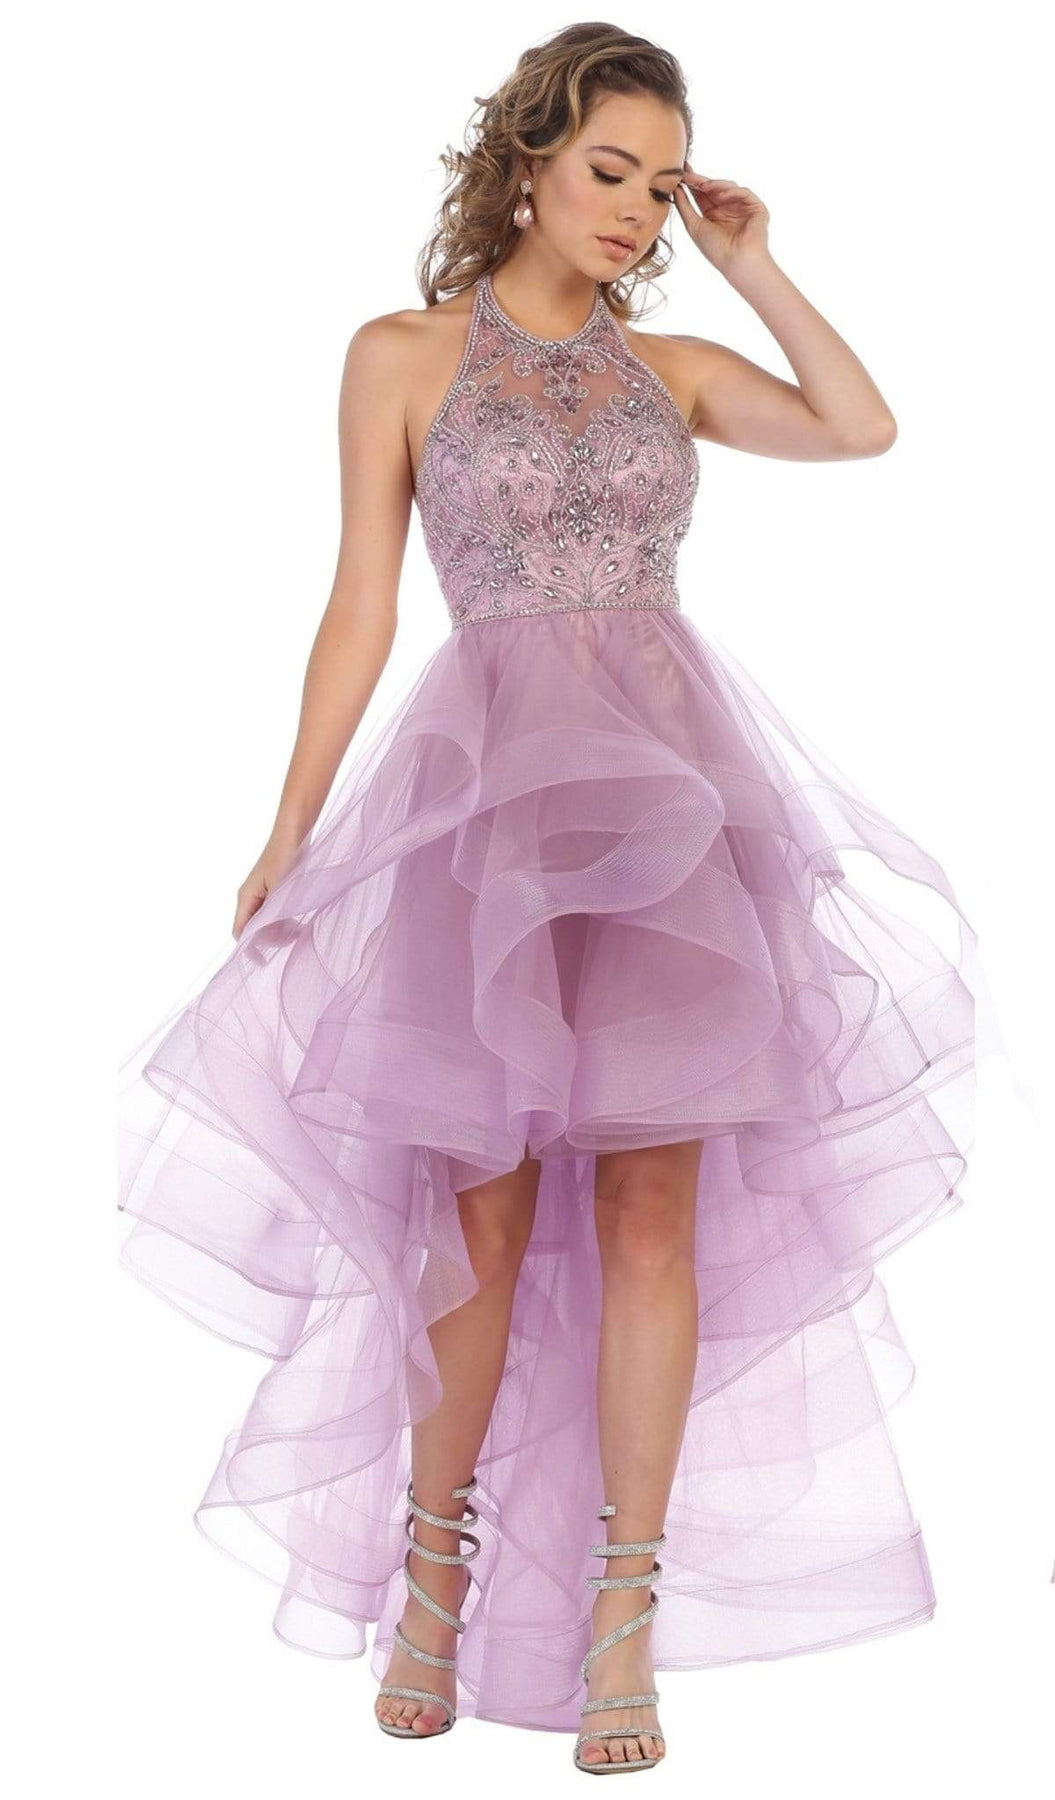 May Queen - RQ7717 Jeweled Illusion Halter High Low Gown Special Occasion Dress 2 / Mauve